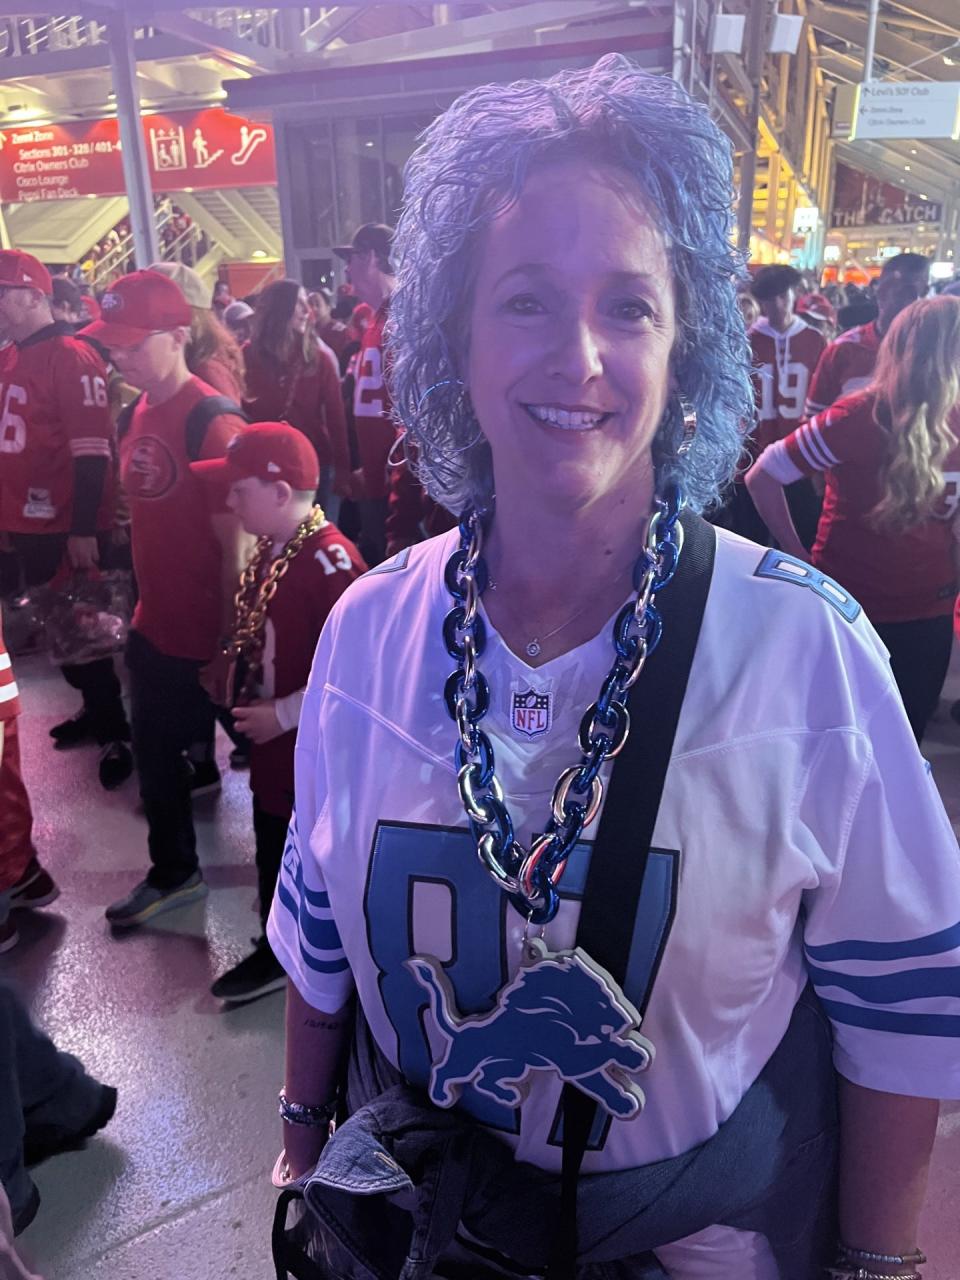 Chris LaPorta, 61, of St. Louis, attended the NFC Championship game to cheer on her nephew, Lions rookie tight end Sam LaPorta. Chris said she knows her nephew is disappointed with the loss to the San Francisco 49ers but they're destined for great things next year.